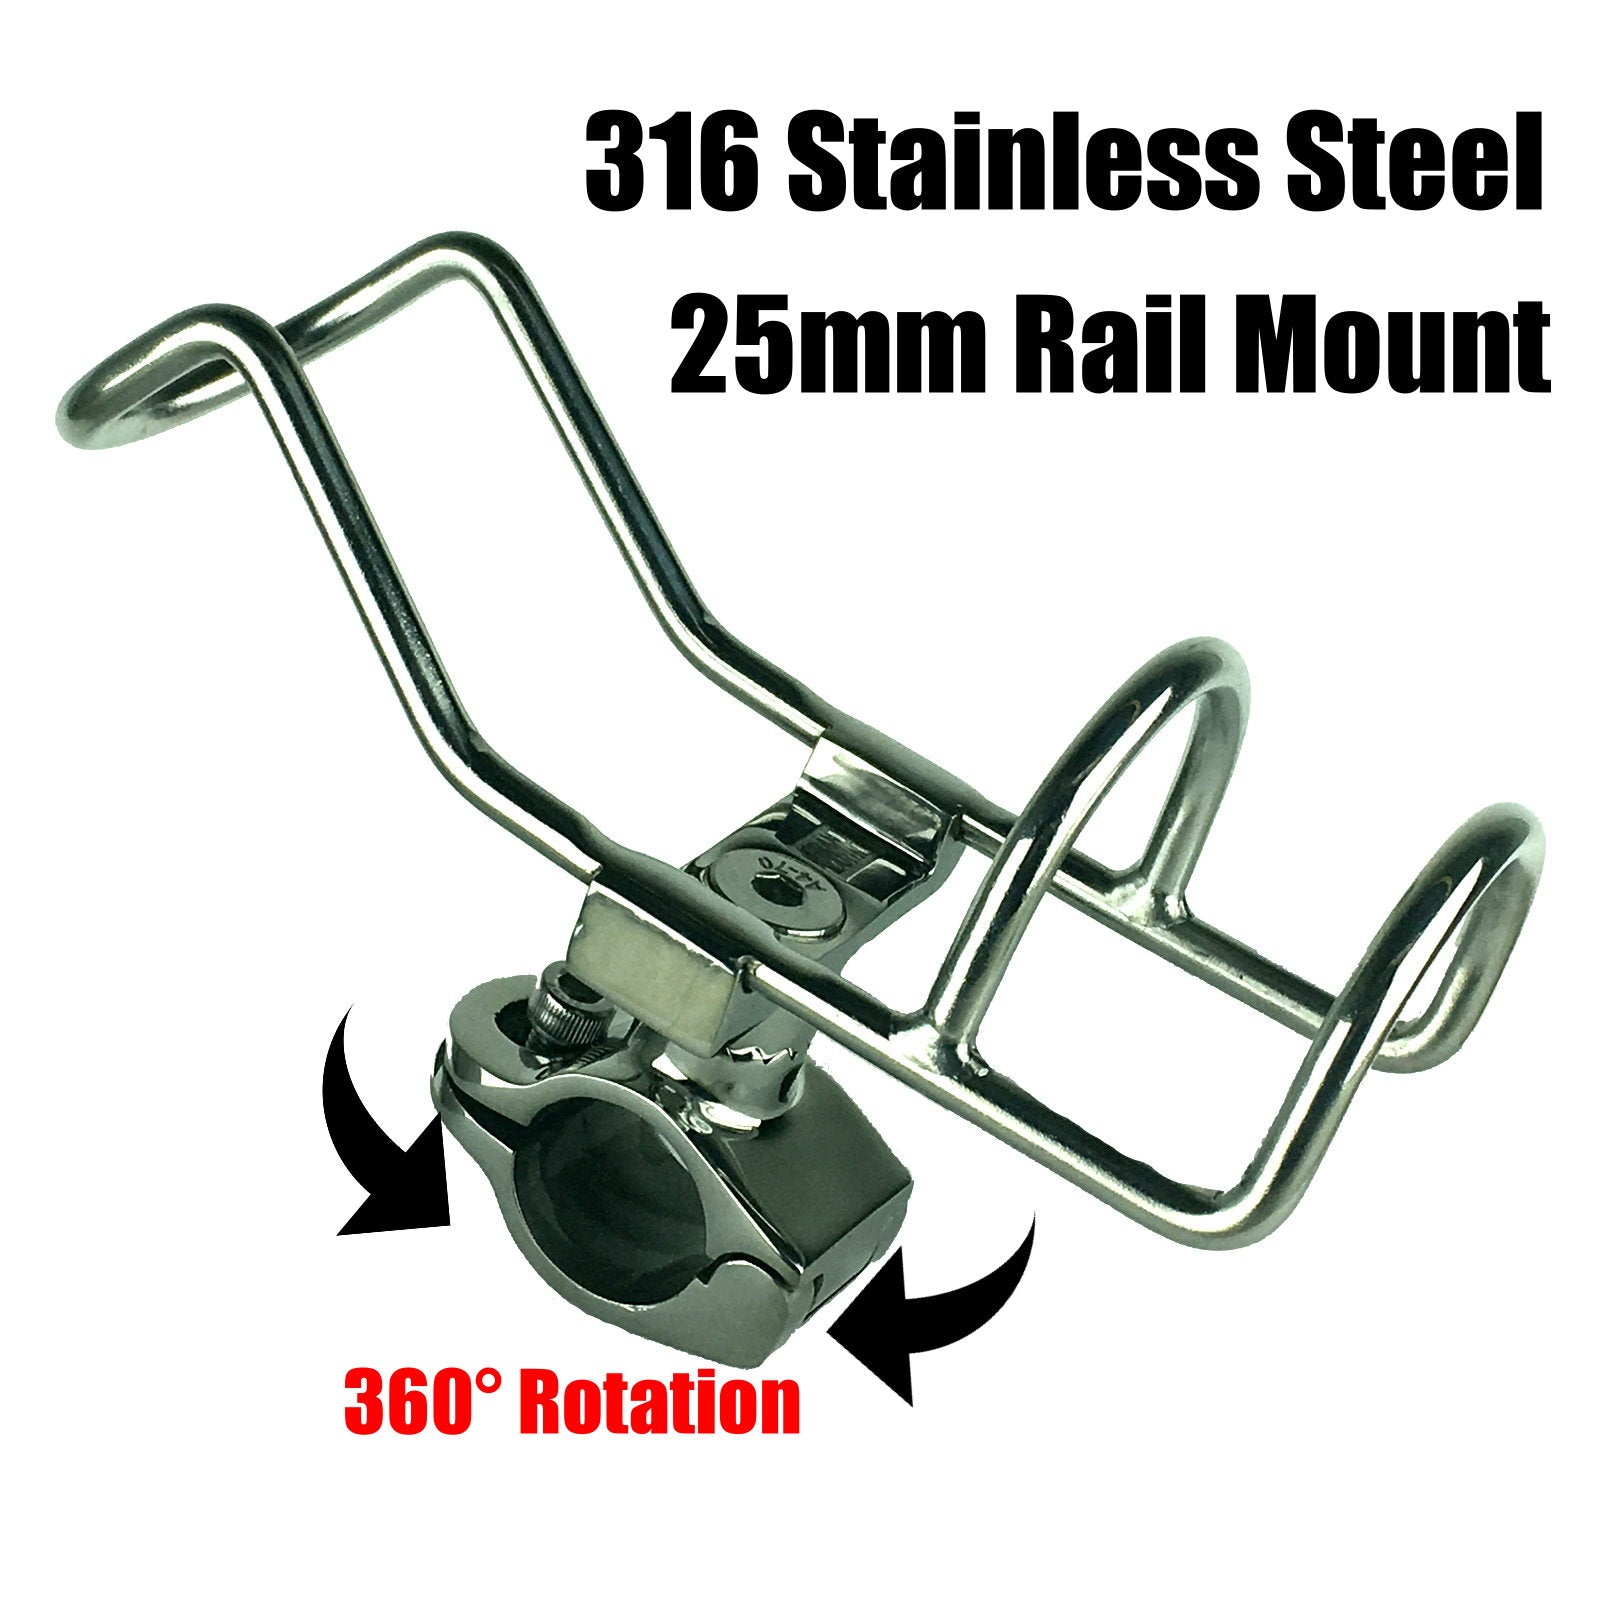 25mm RAIL MOUNT Rod Holder 316 Stainless Steel Double Wire Fishing